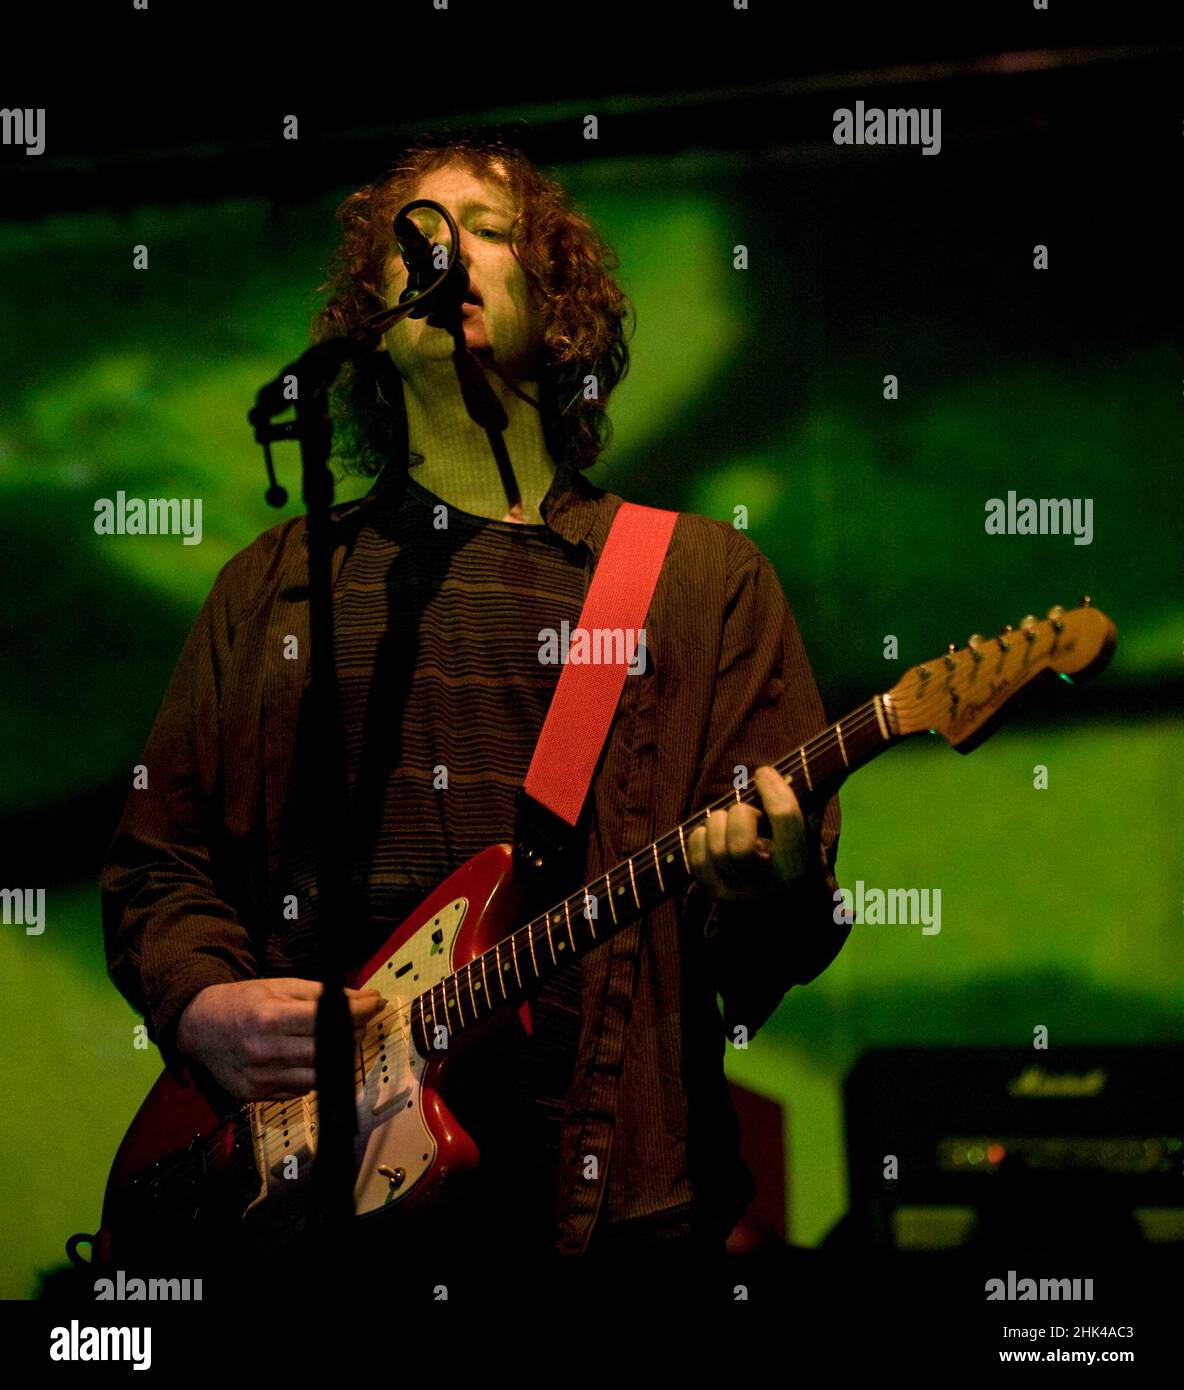 Kevin Shields of My Bloody Valentine at the Electric Arena tent, Electric Picnic 2008, Stradbally, Laois, Ireland. The avant garde indie outfit dropped from view in the early 90s, My Bloody Valentine in 2008 for series of rare appearances - the first in 13th years. . Stock Photo